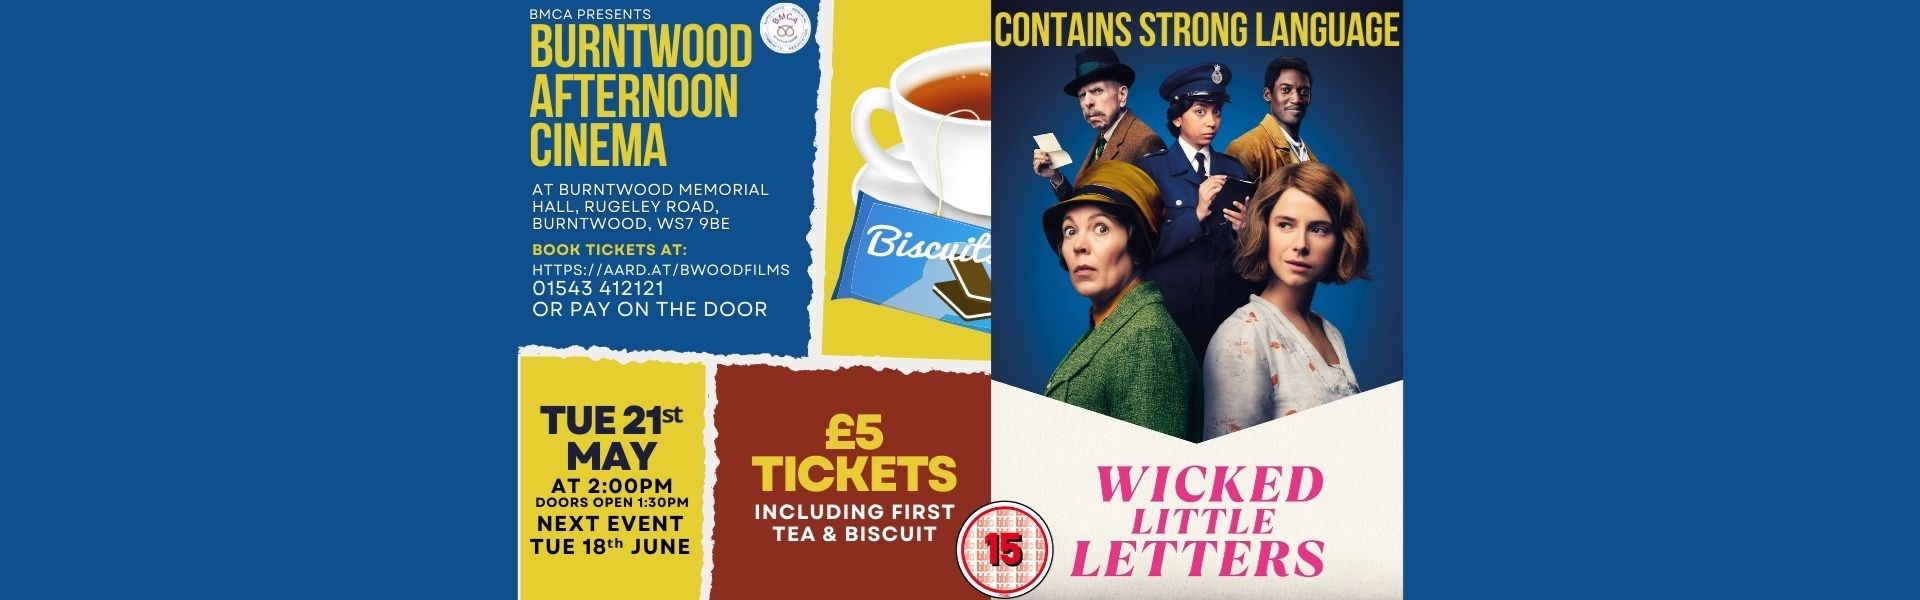 Burntwood Afternoon Cinema - Wicked Little Letters